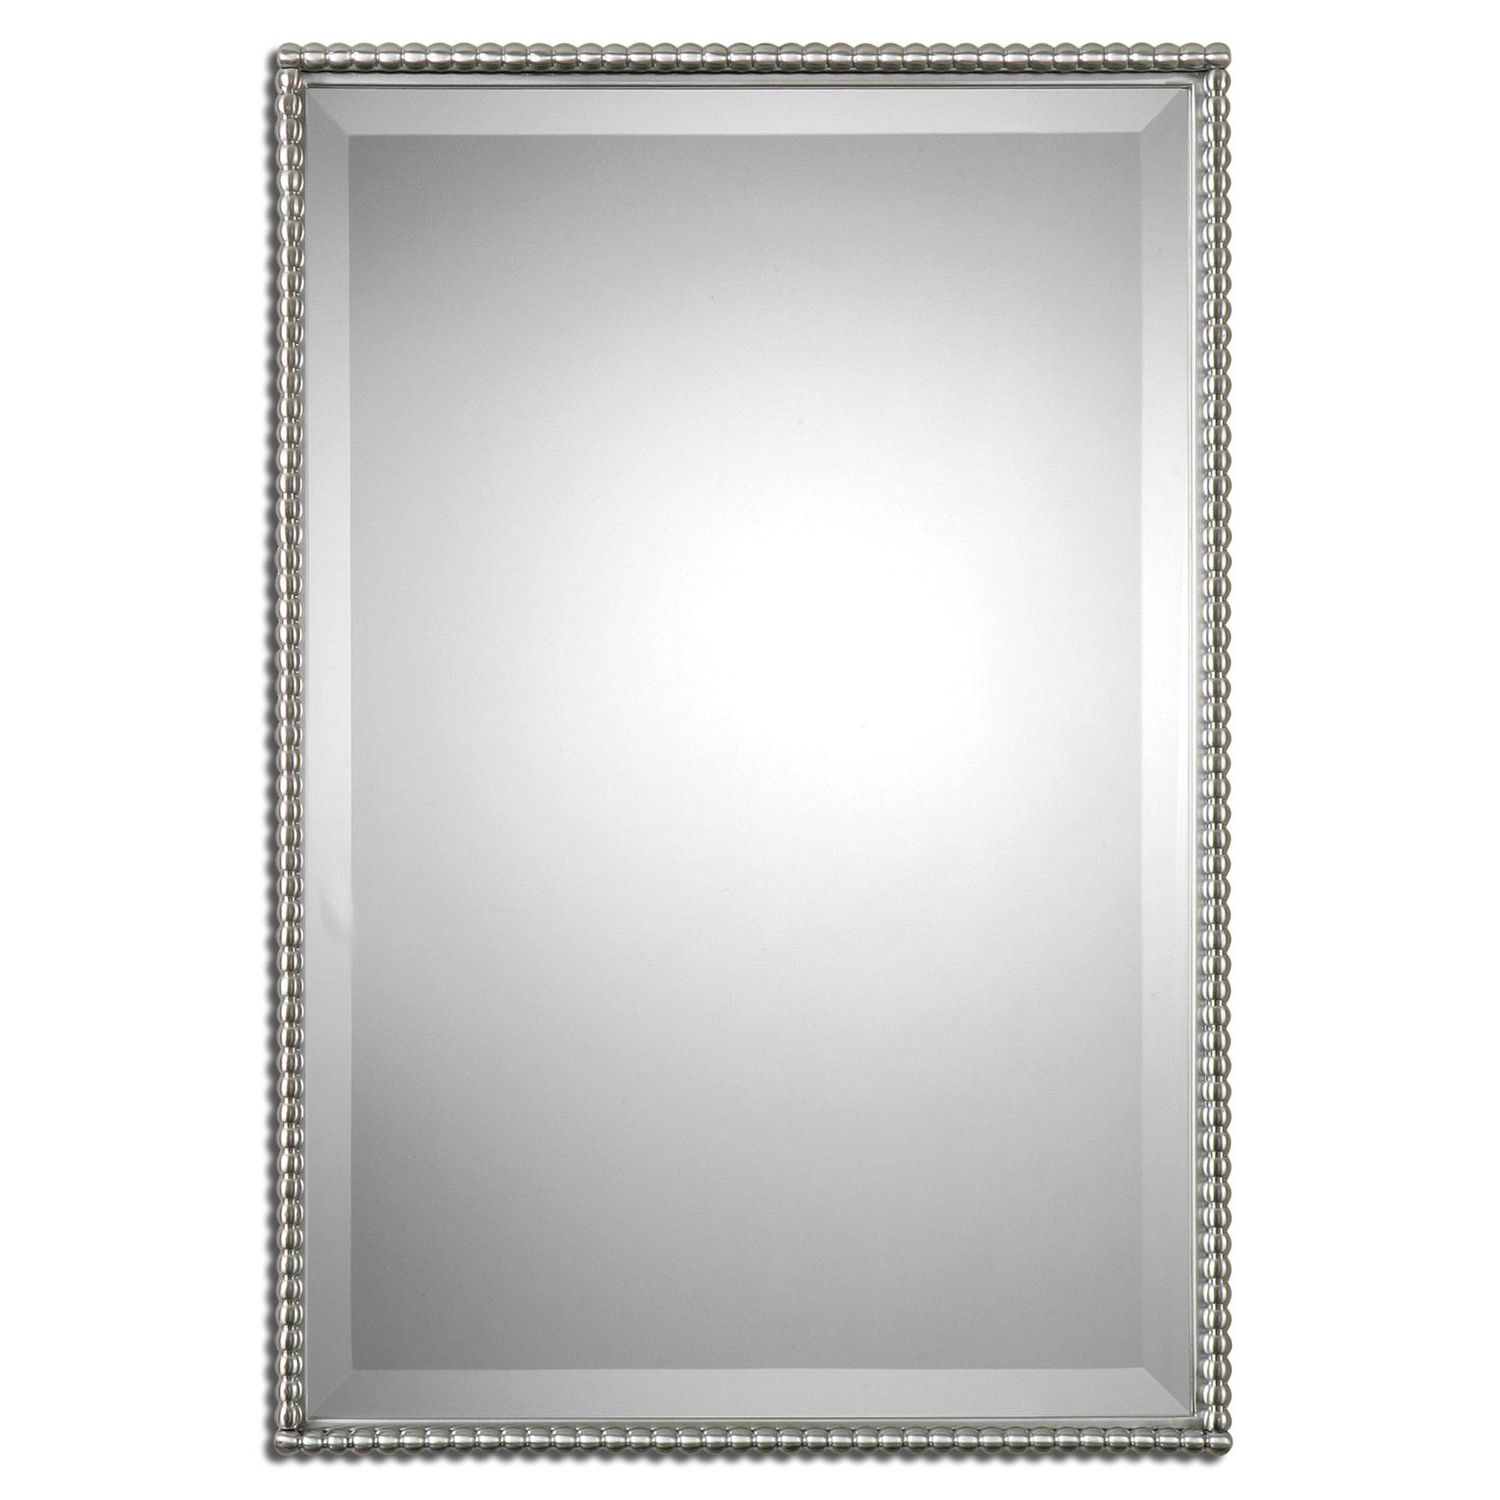 Large Silver Framed Wall Mirror With Regard To 2019 Top 34 Blue Ribbon Brushed Nickel Bathroom Mirror Sherise (Photo 10 of 20)